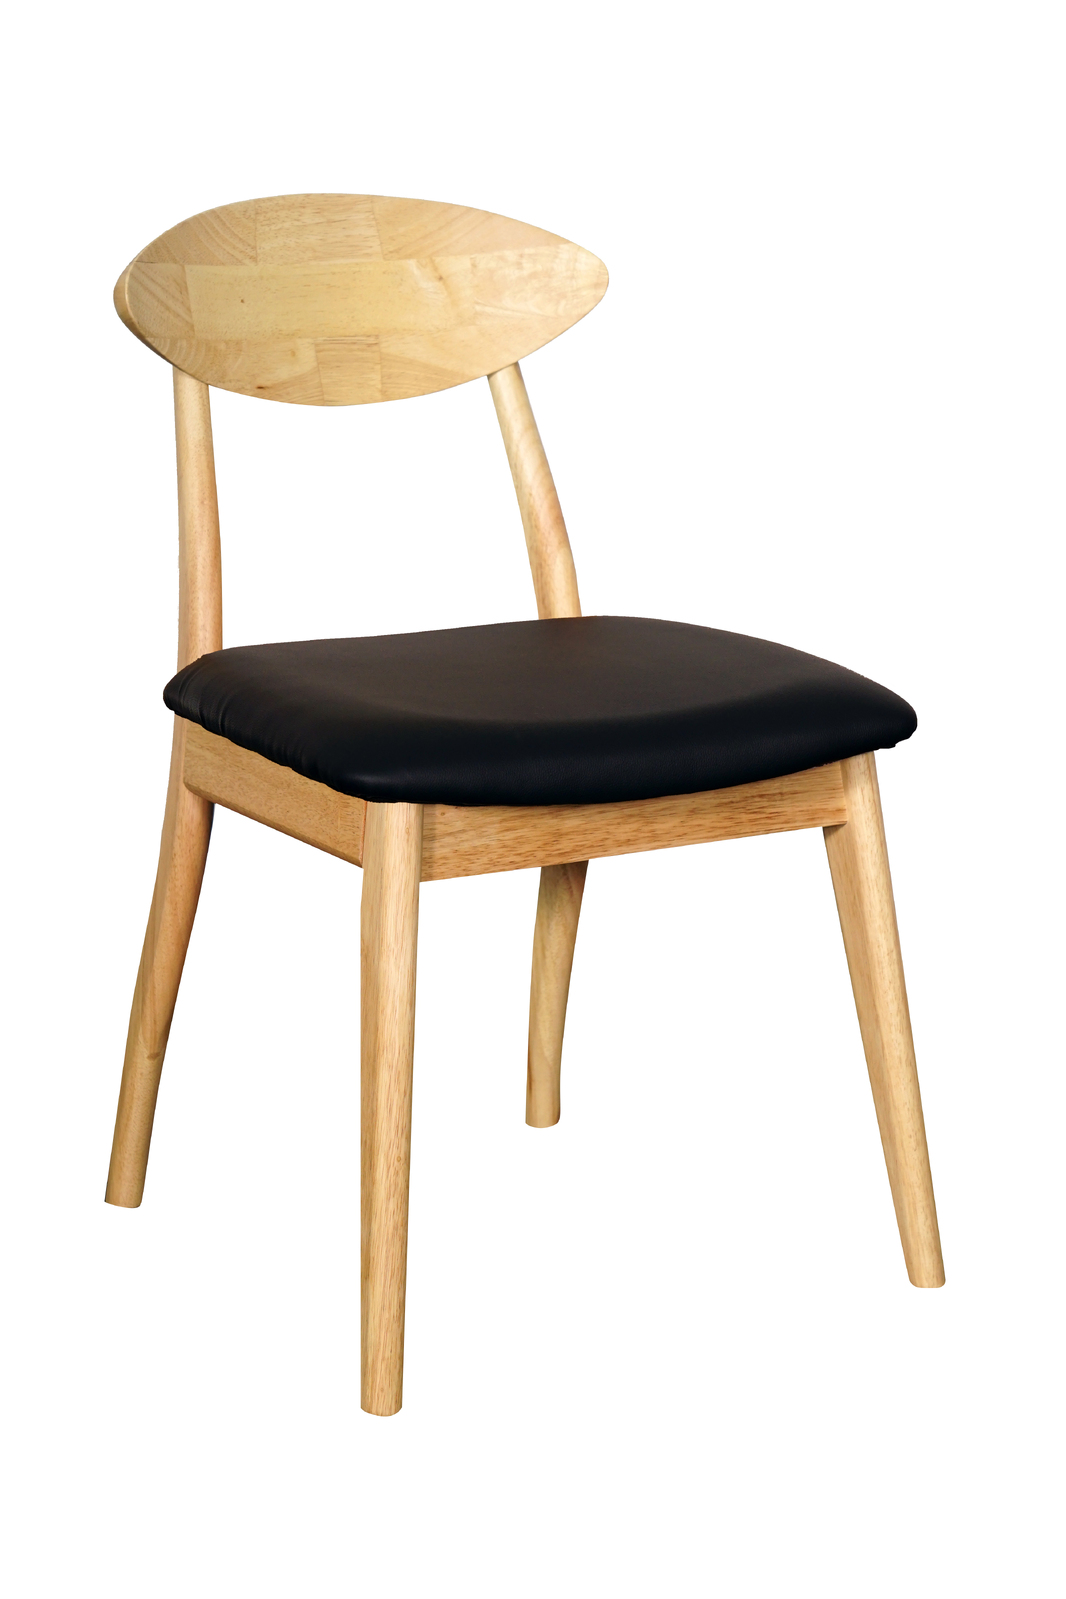 Moon Timber Dining Chair Black PU Padded Seat with Natural Back and Frame